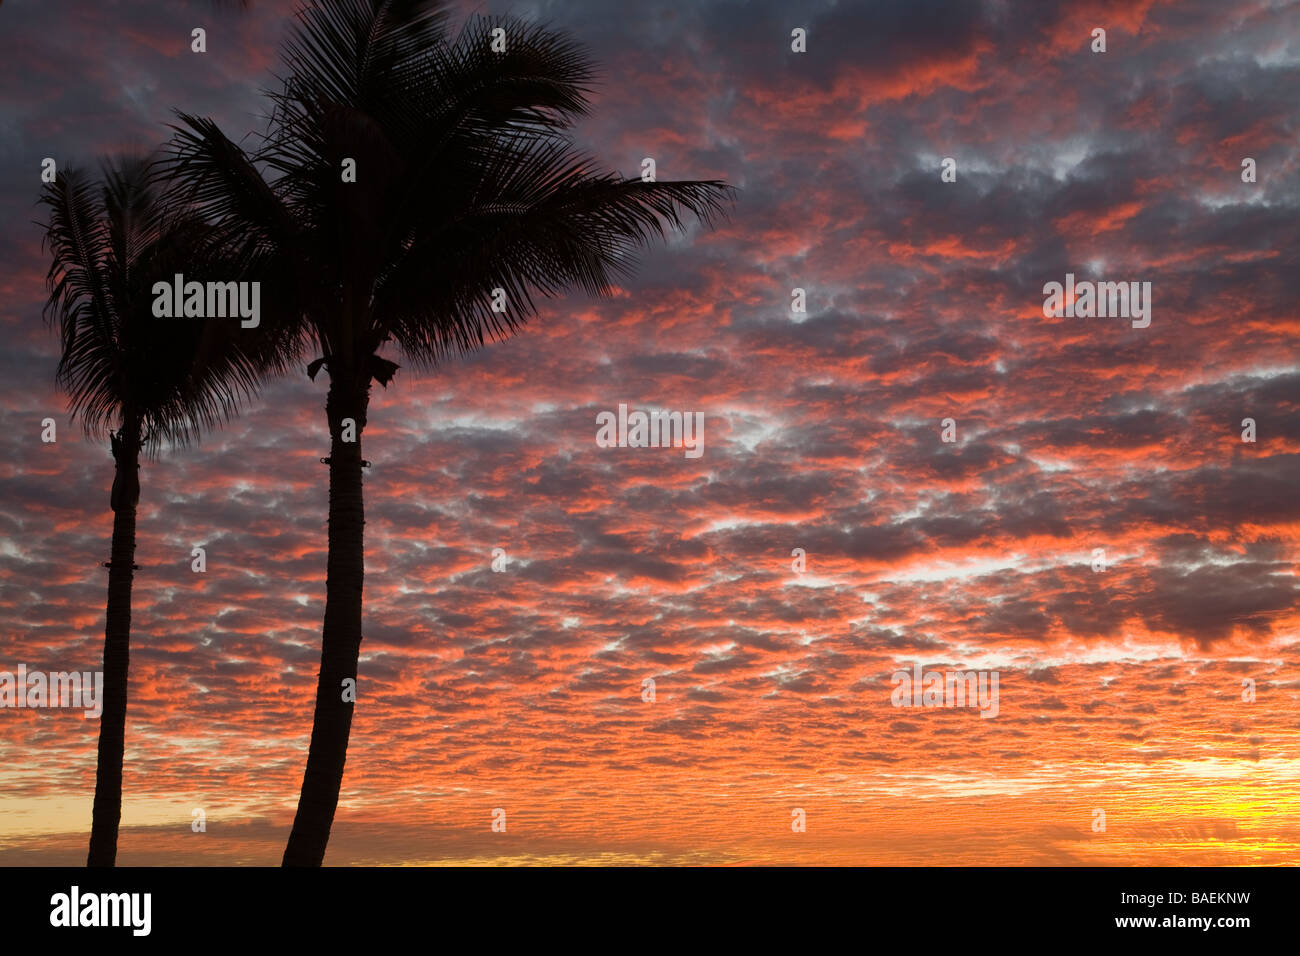 MEXICO San Jose del Cabo Silhouette of trunk and branches of palm tree against pink sky at sunrise over ocean Stock Photo